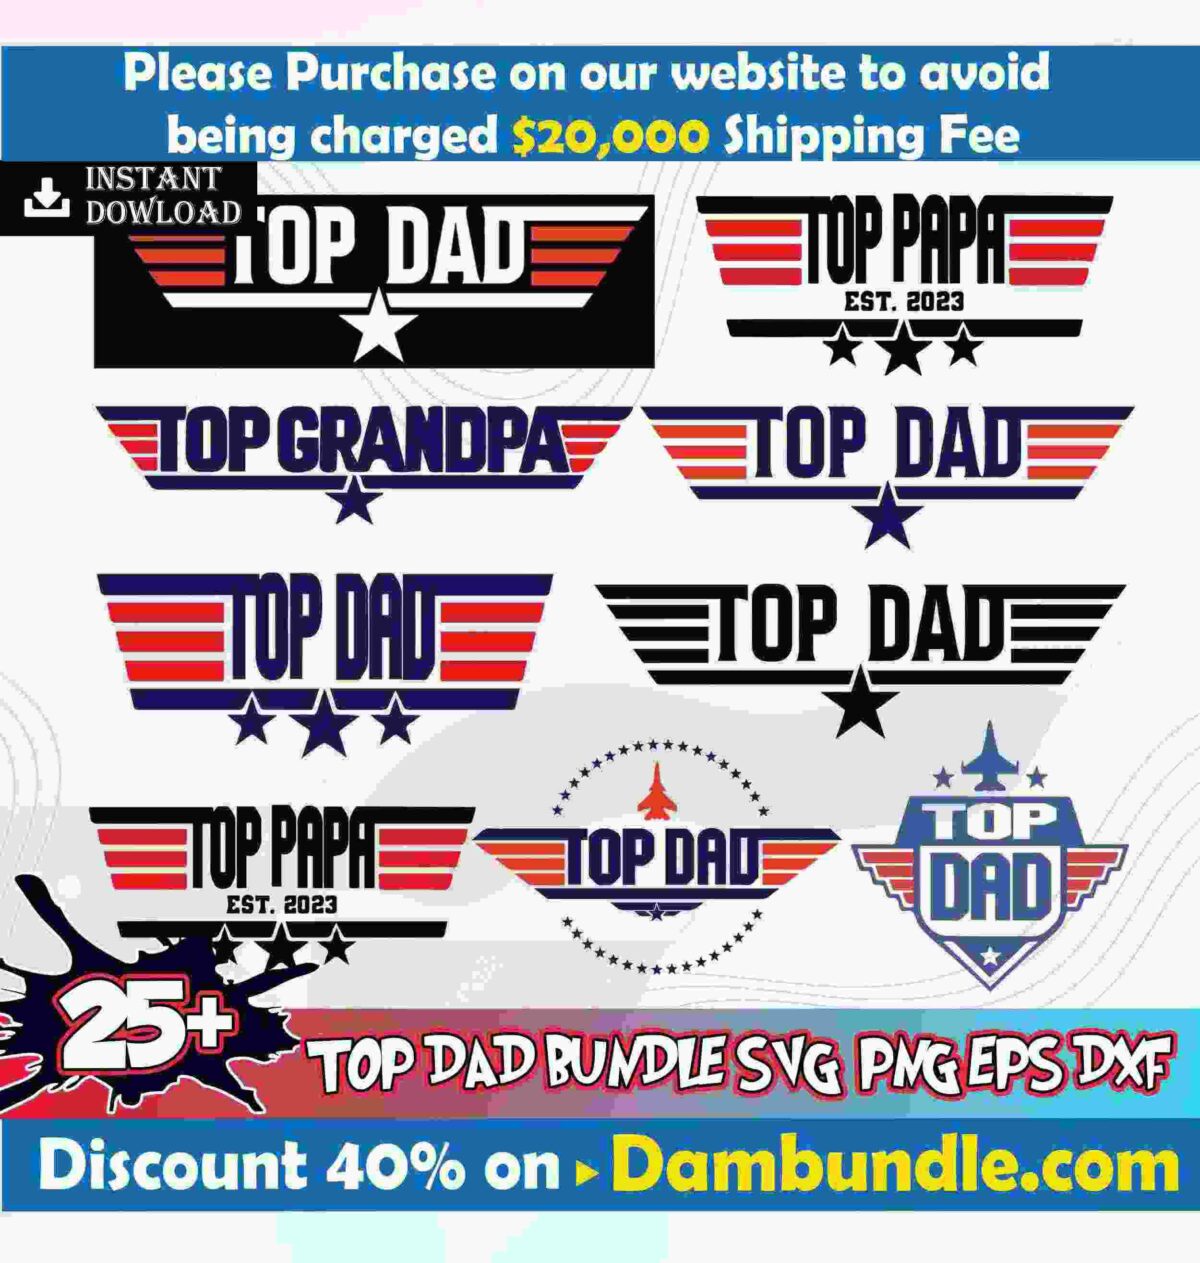 A flyer advertising a "Top Dad Bundle" with 25+ SVG, PNG, EPS, DXF designs including variations of "Top Dad" and "Top Grandpa." Discount is 40% on dambundle.com.